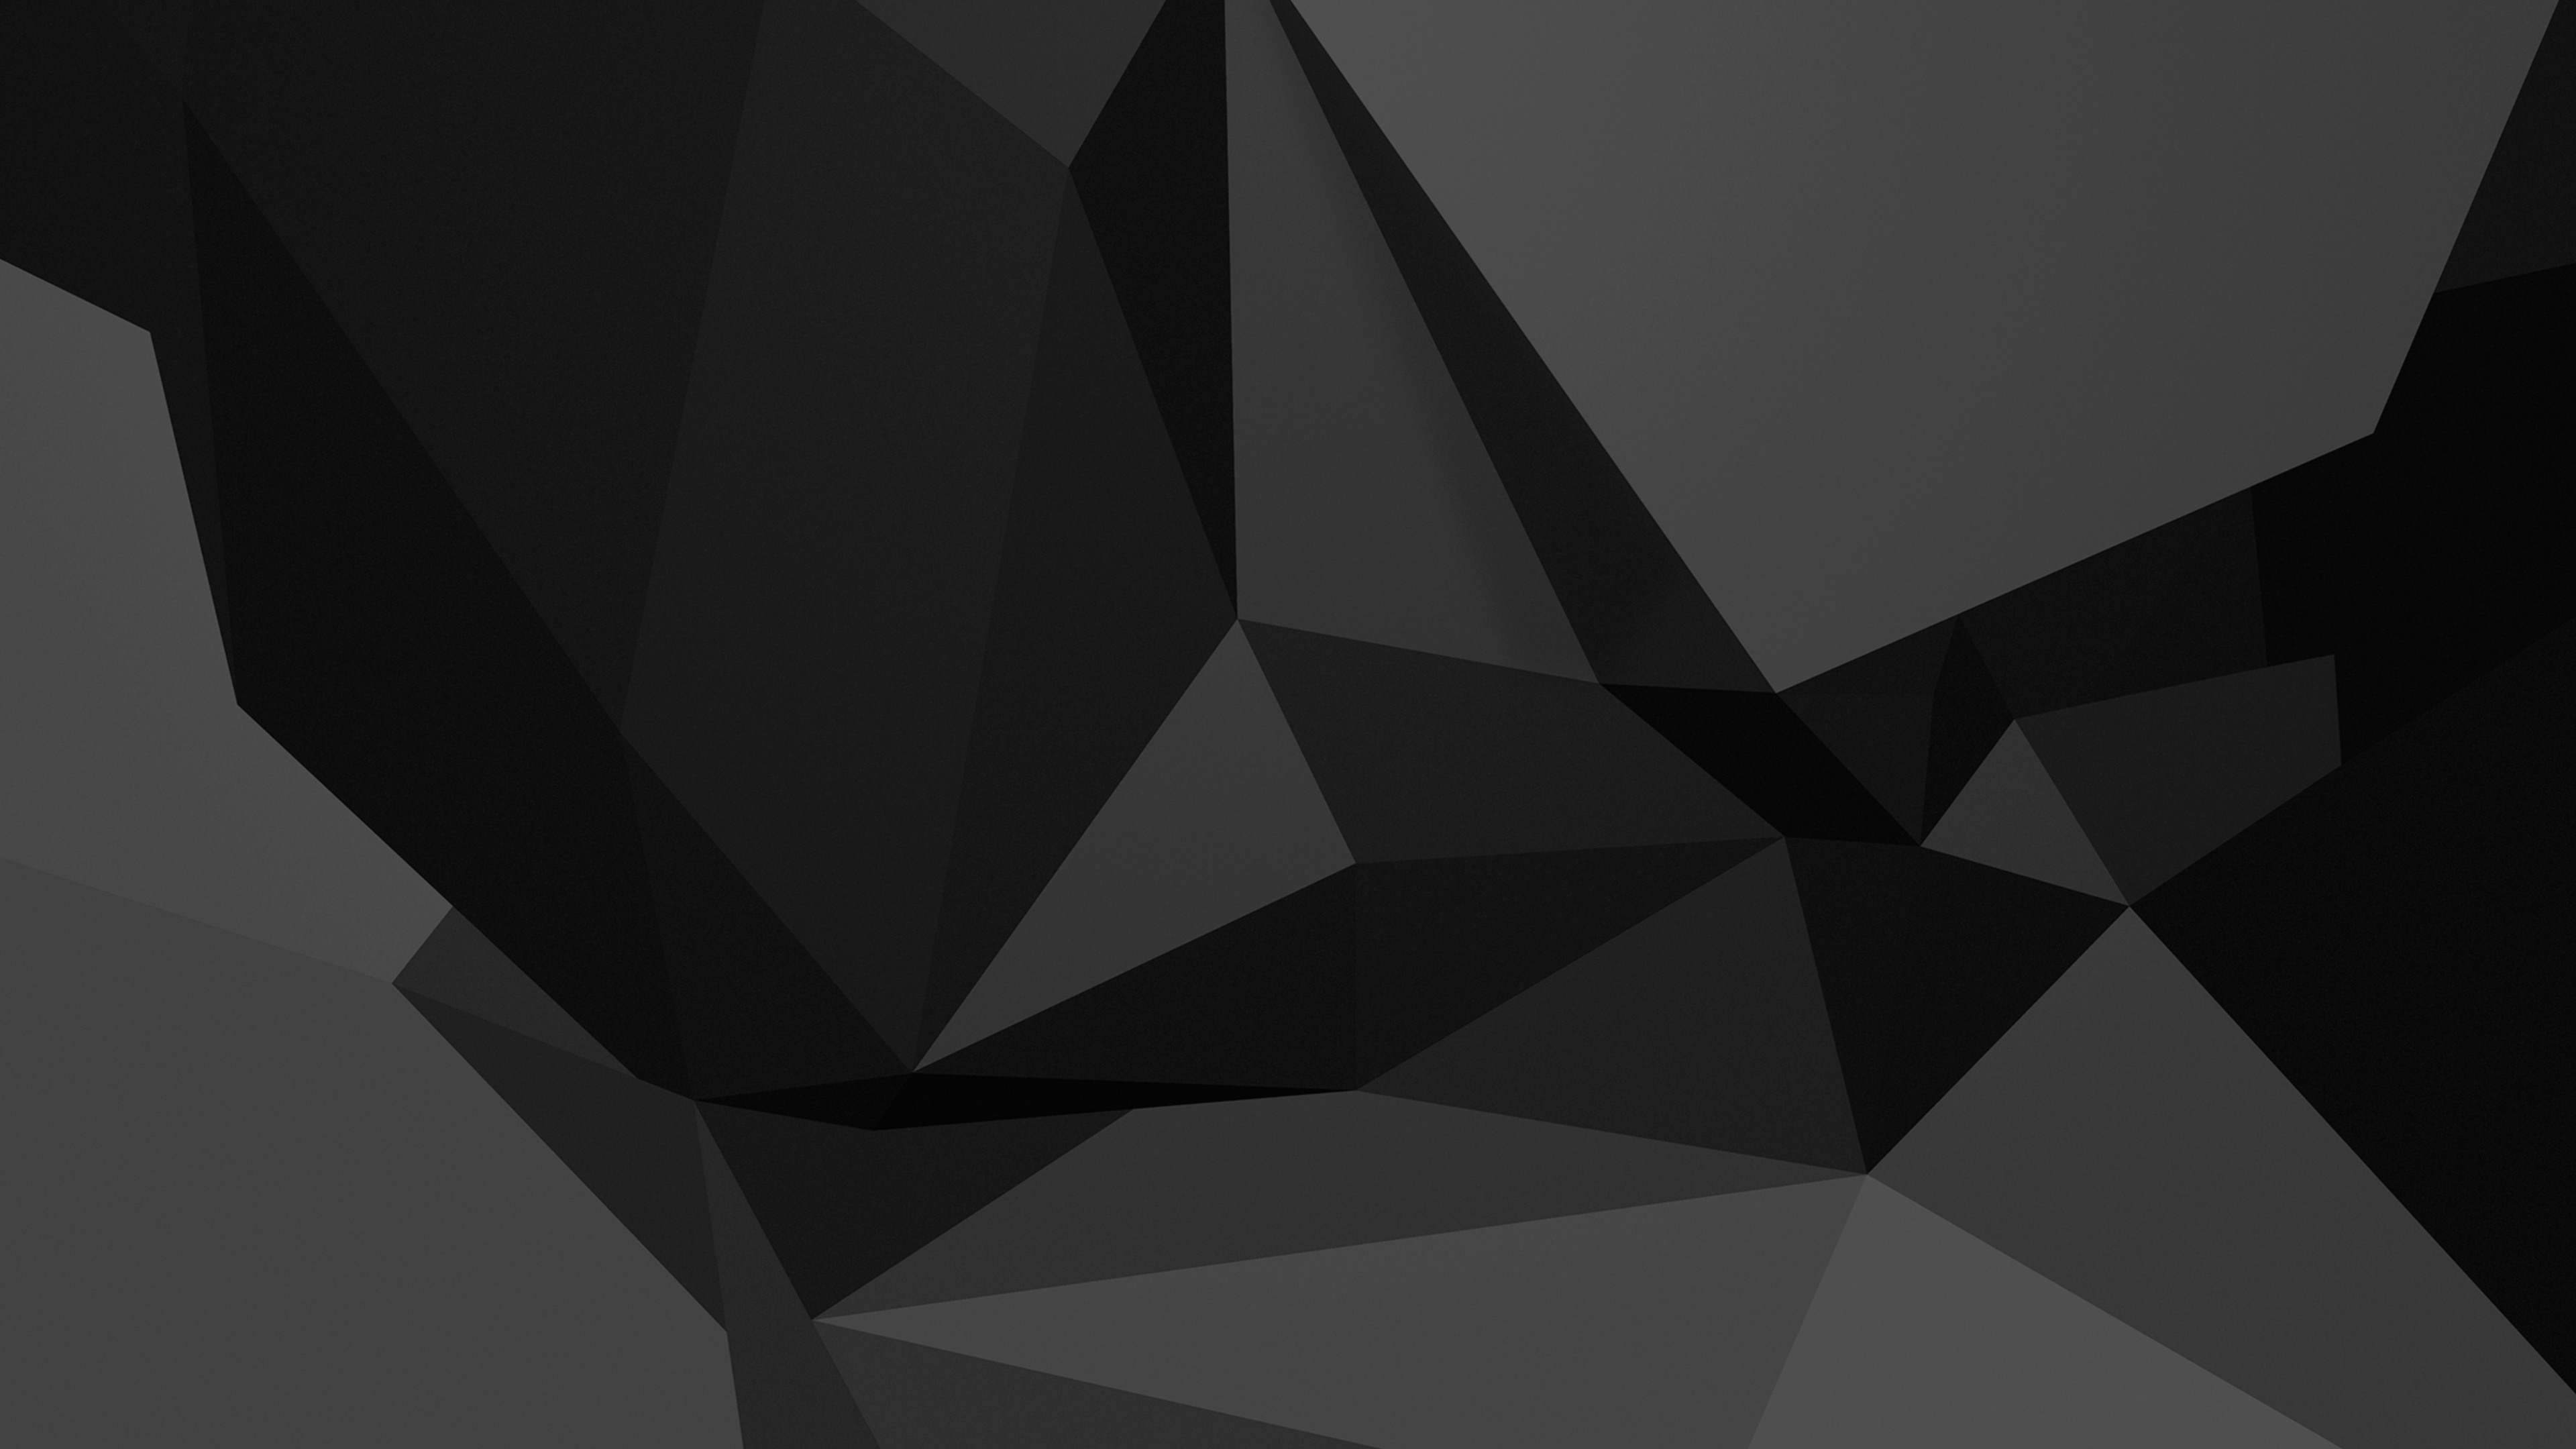 Black and White Abstract Illustration. Wallpaper in 3840x2160 Resolution